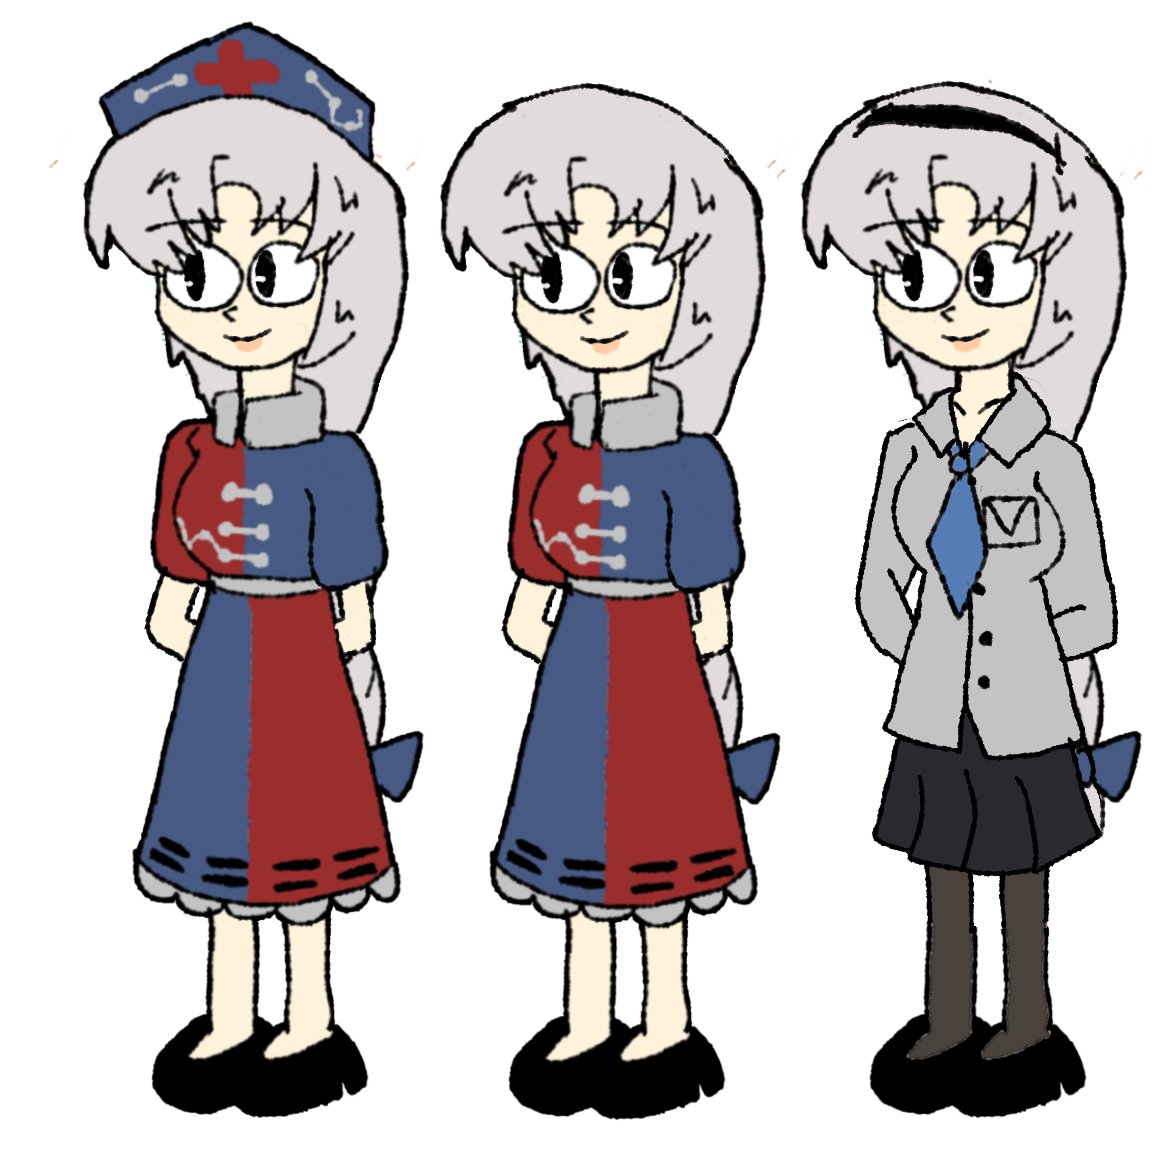 Some Eirin drawings I never posted :0

#touhou #touhouproject #東方project #touhoufanart #eirinyagokoro